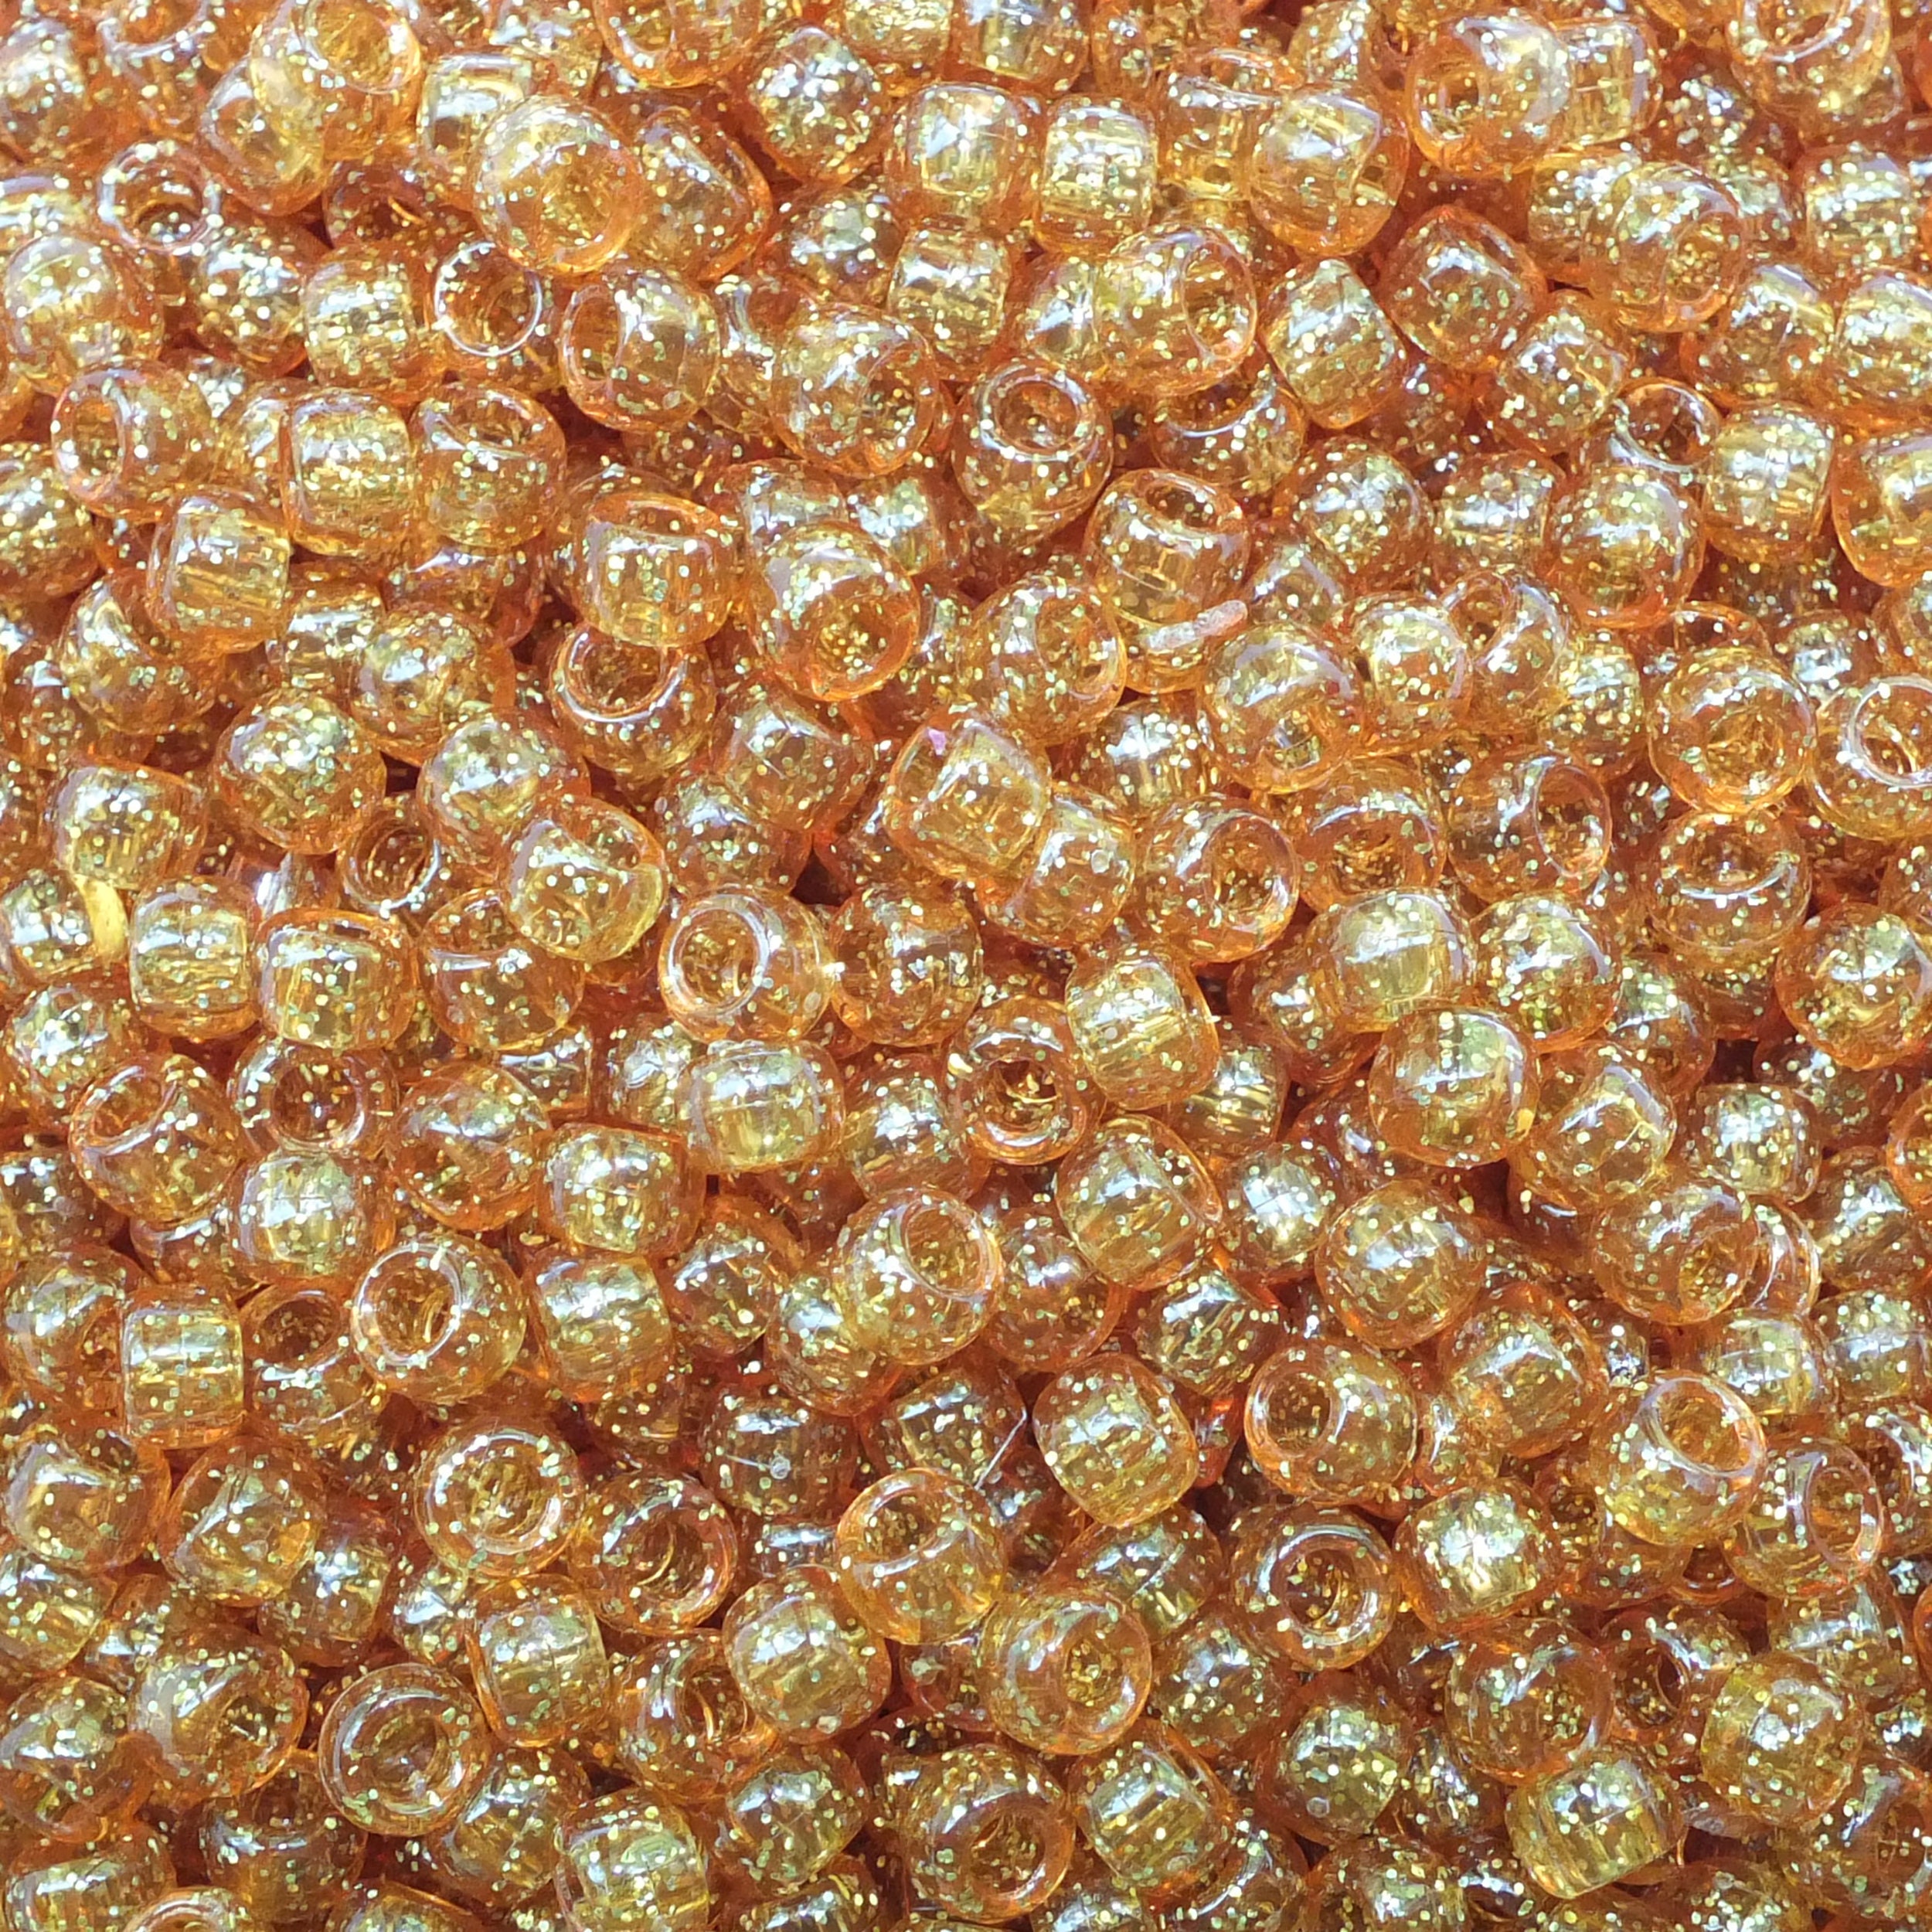 Colorful Translucent Glitter Pony Beads (6mm x 9mm)